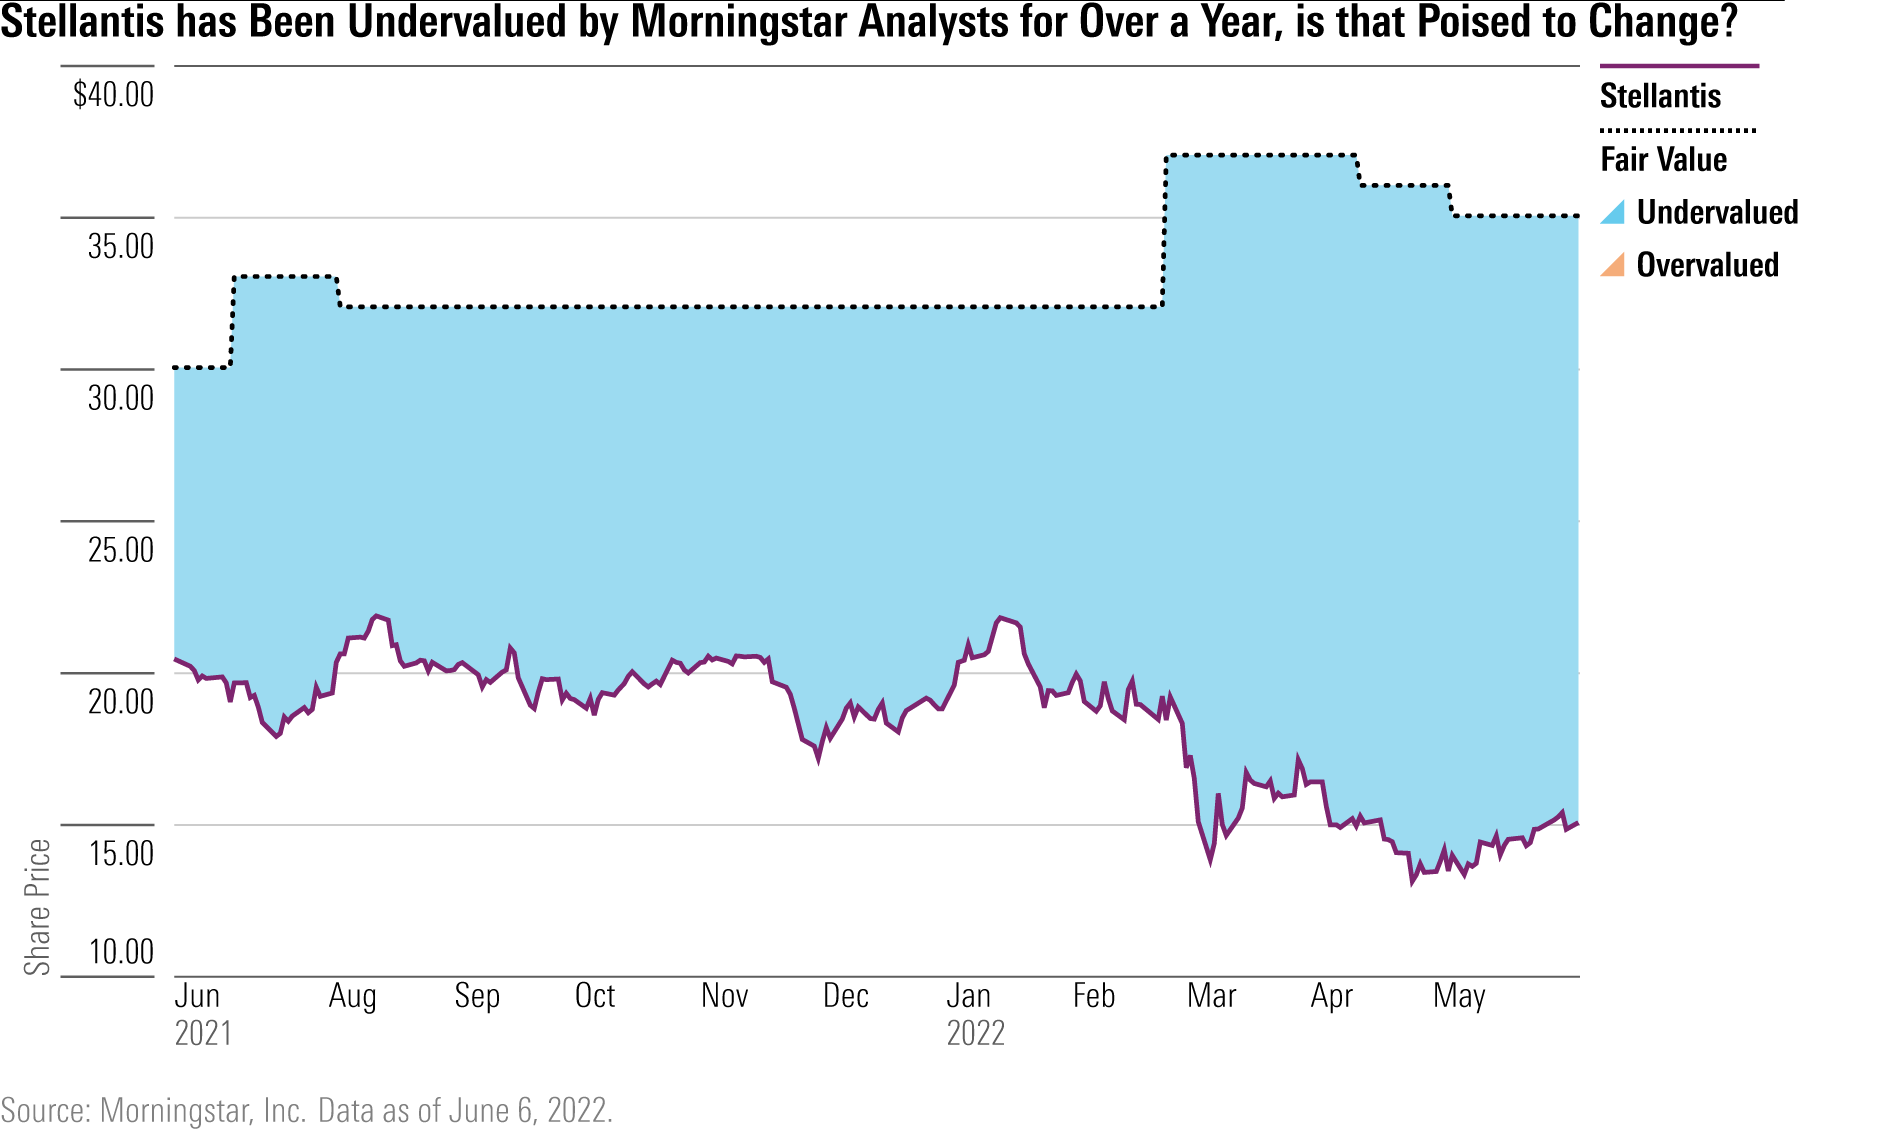 A line chart of Stellantis' stock price versus Morningstar's valuation since January 2021.